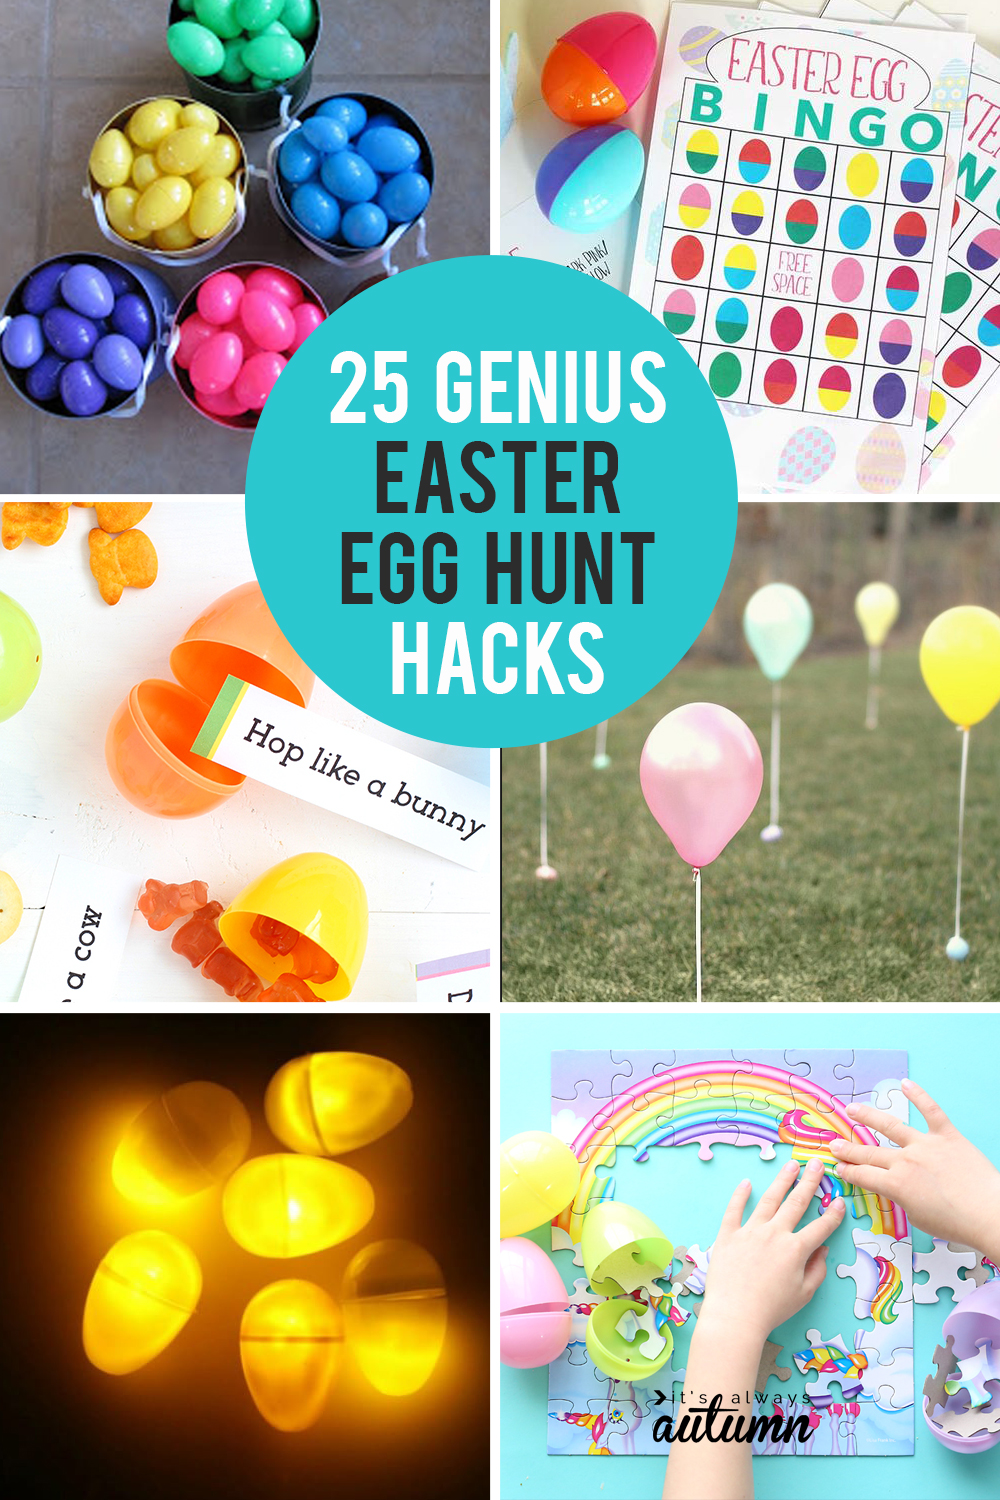 25 genius Easter egg hunt ideas and hacks: how to make it fair for little kids and fun for teens!